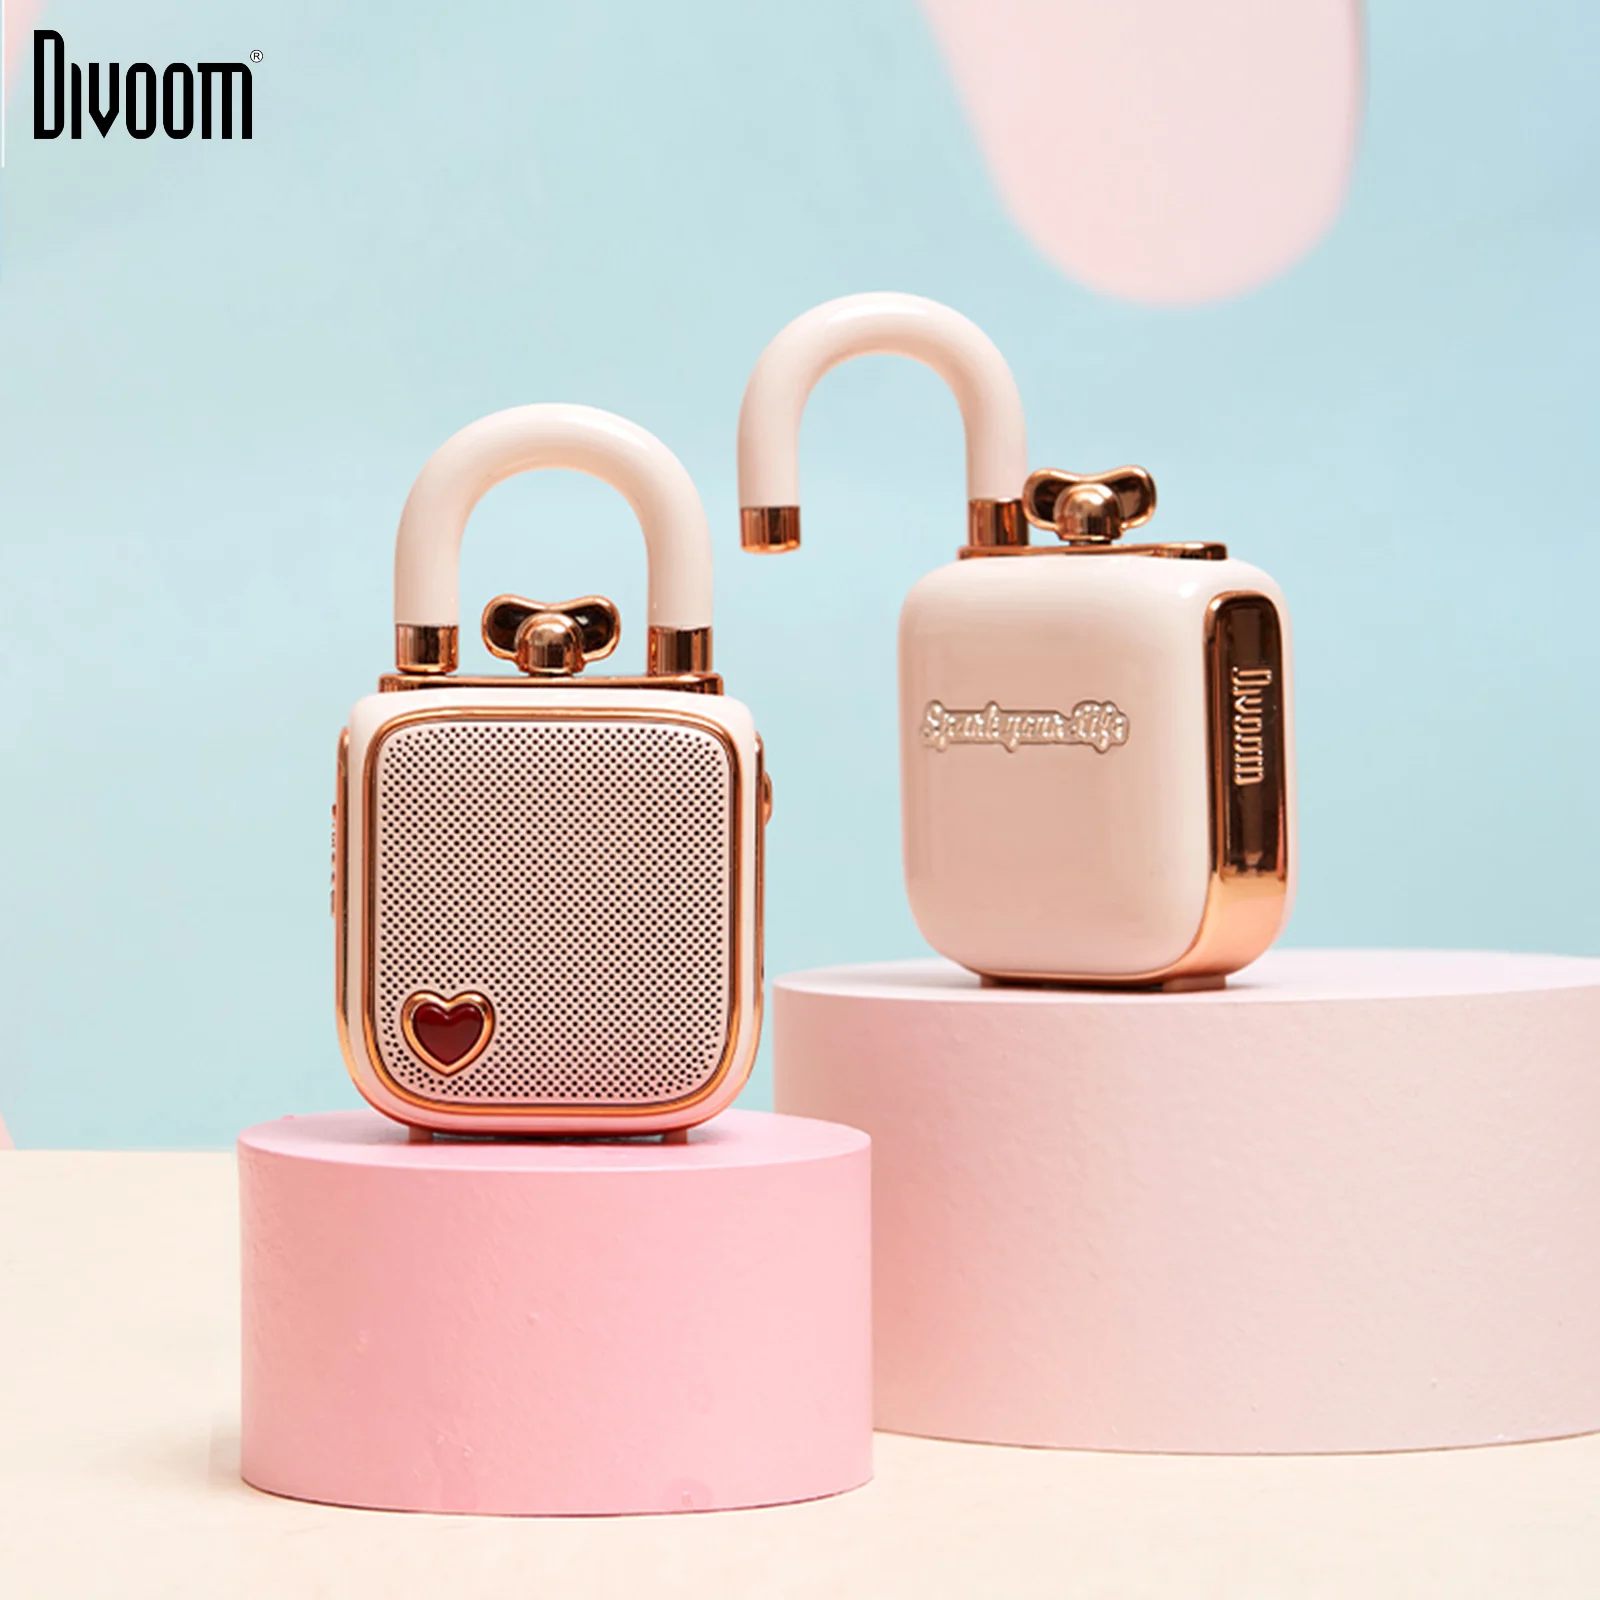 Original Divoom Lovelock Mini Portable Wireless Bluetooth Speaker,With Recording,Tws Connection,Unique Gift for Home Camping